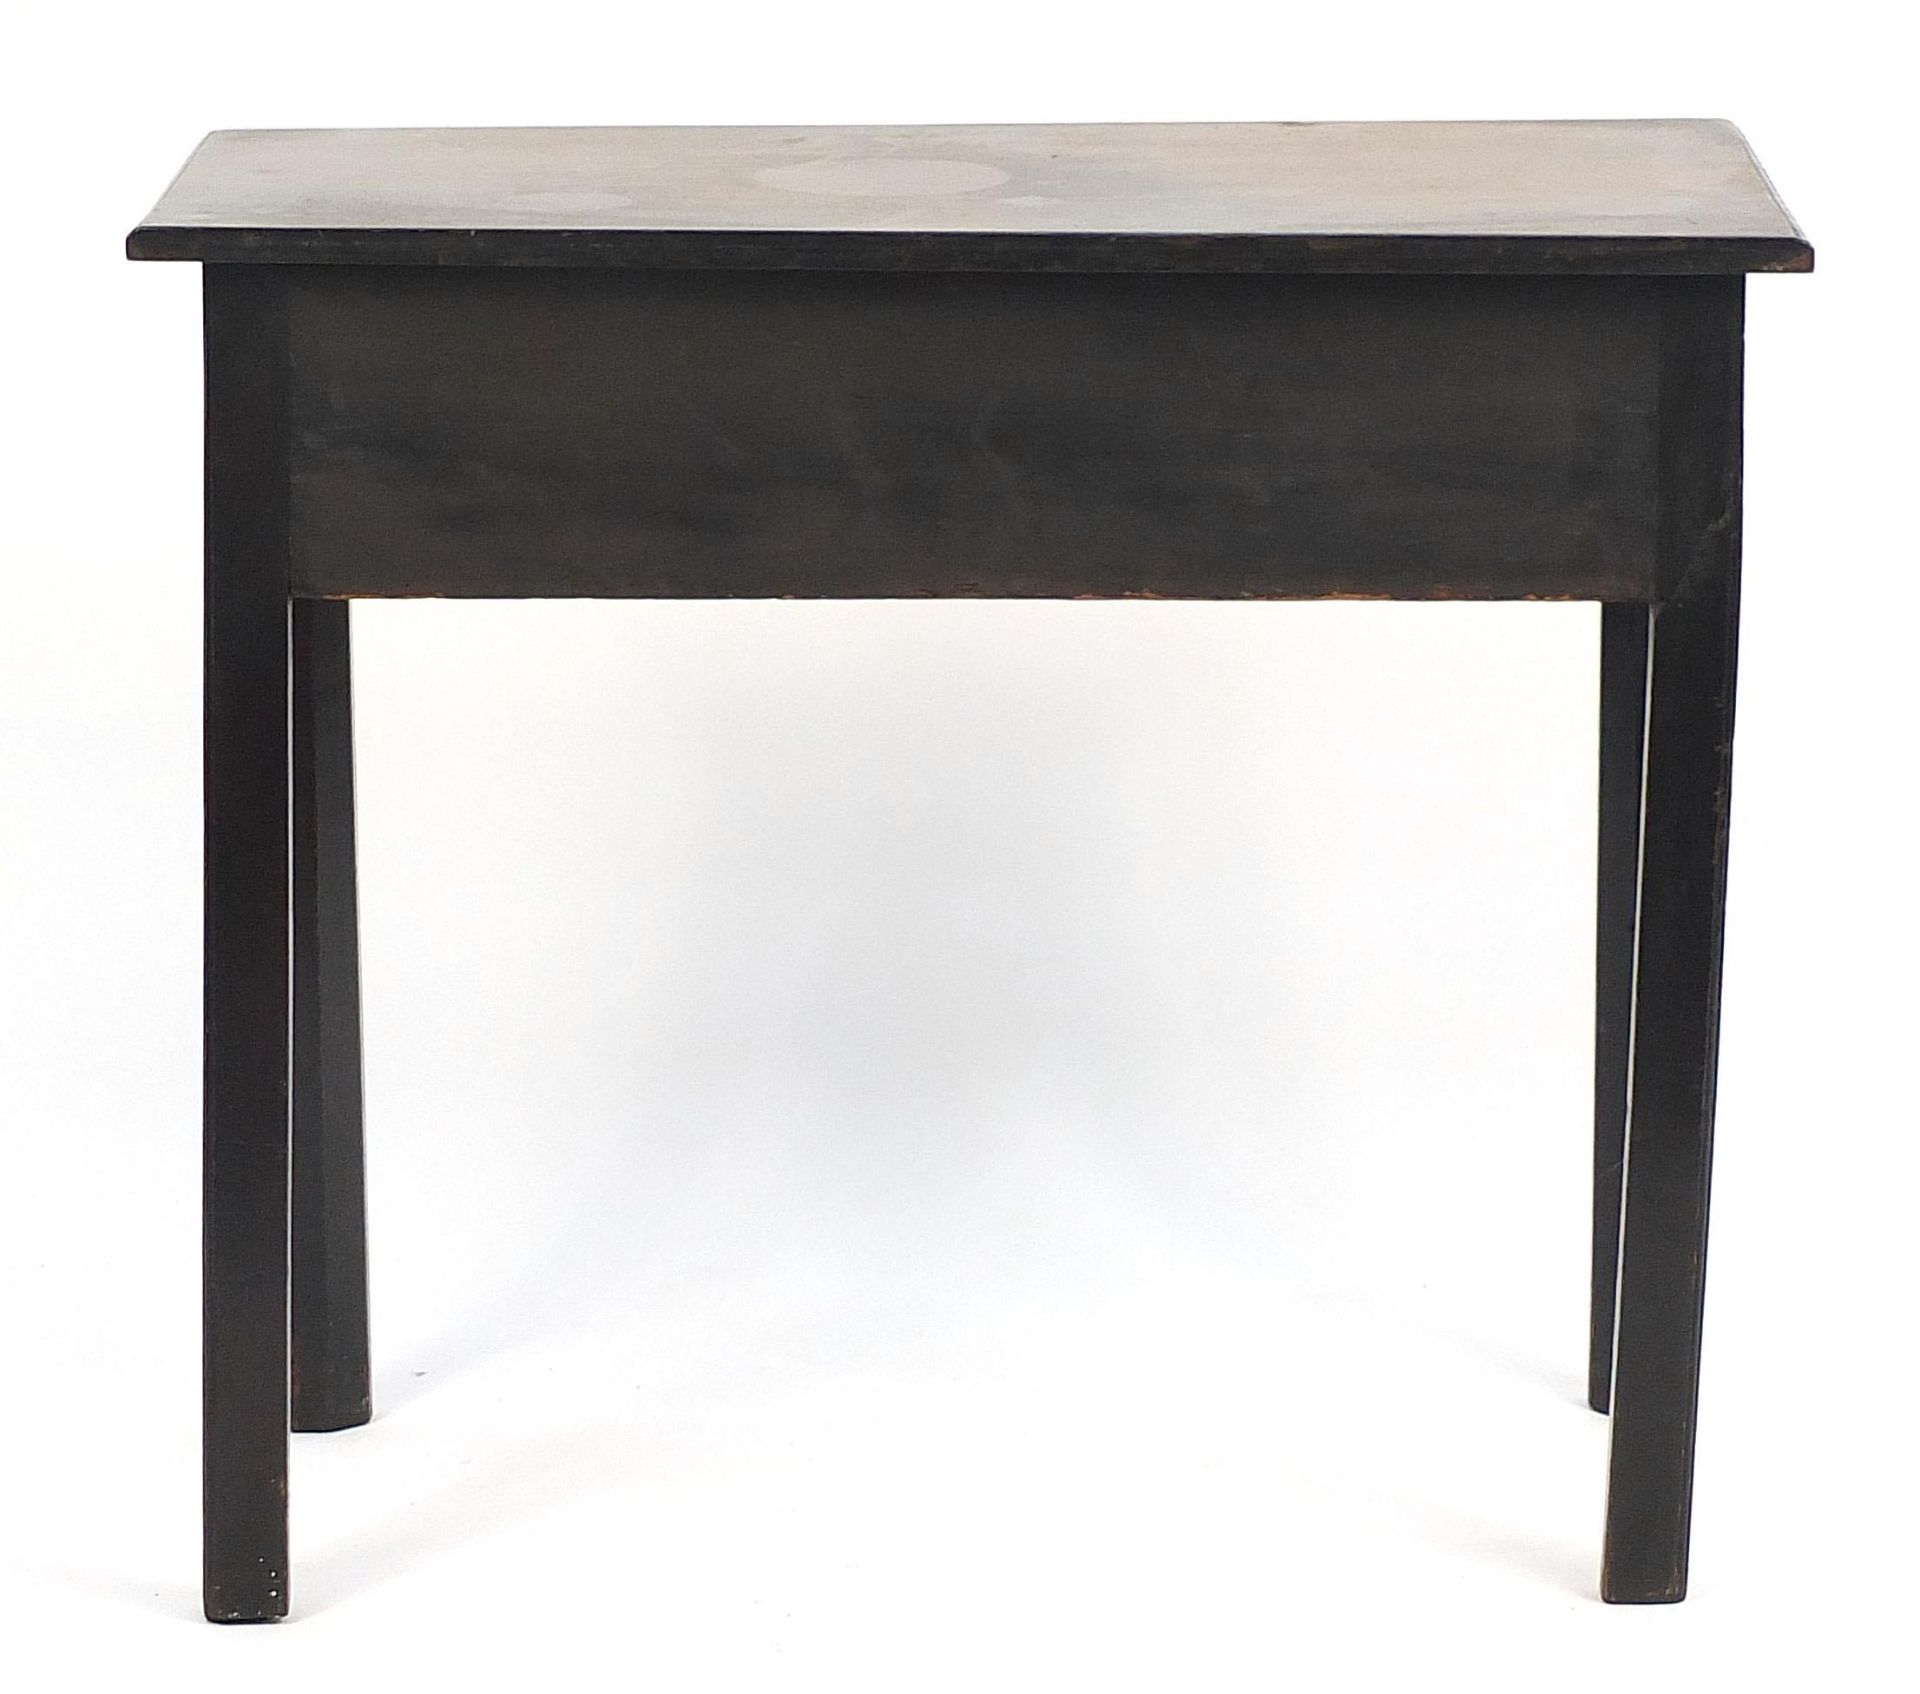 Mahogany side table with frieze drawer and brass handles, 71cm H x 82cm W x 40cm D - Image 4 of 4